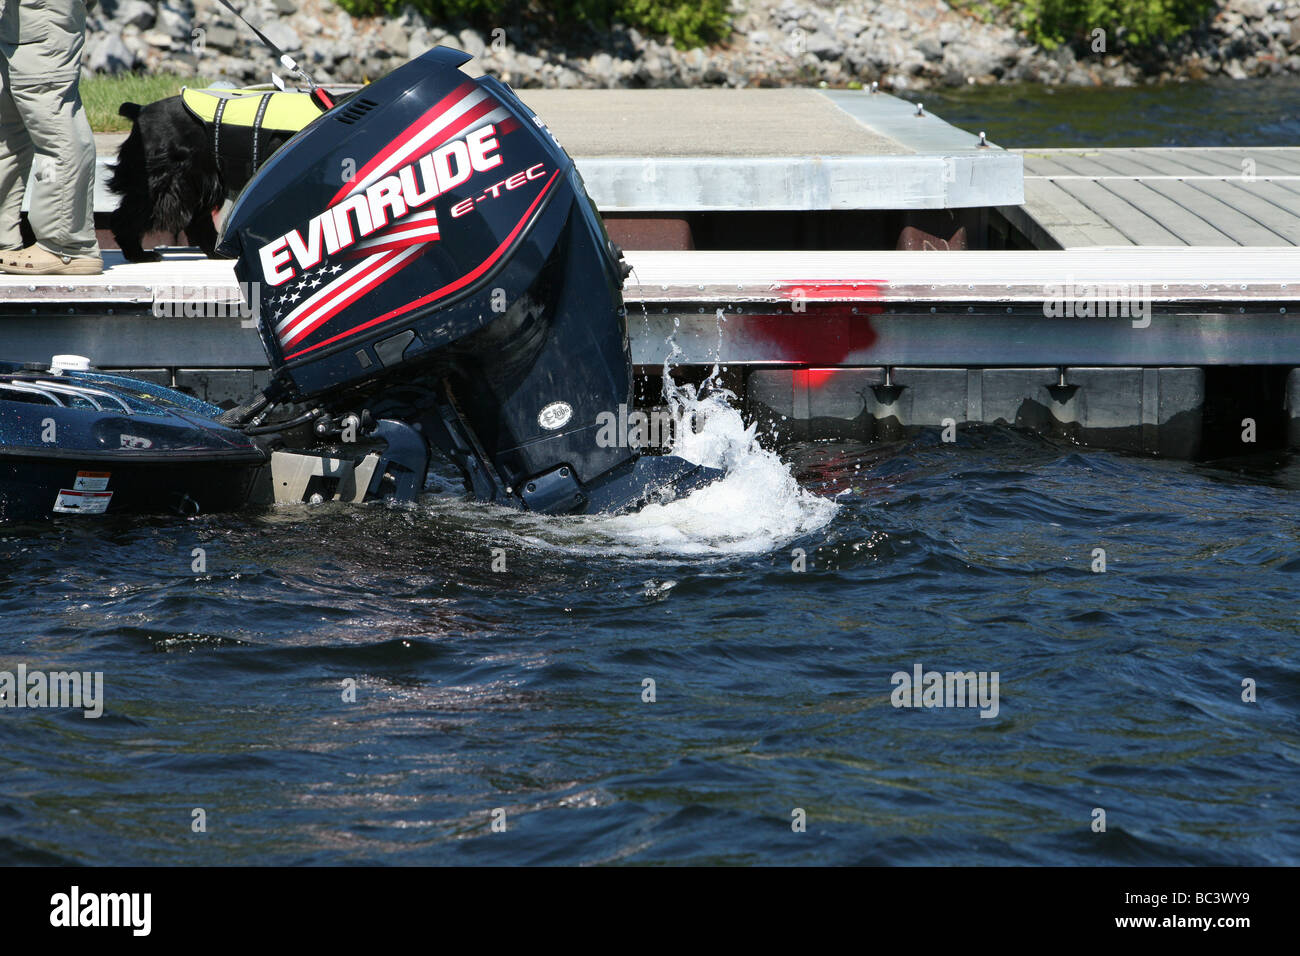 A 225 e-tec Evinrude outboard motor shot in close up with its prop churning and splashing up the water at a dock. Stock Photo